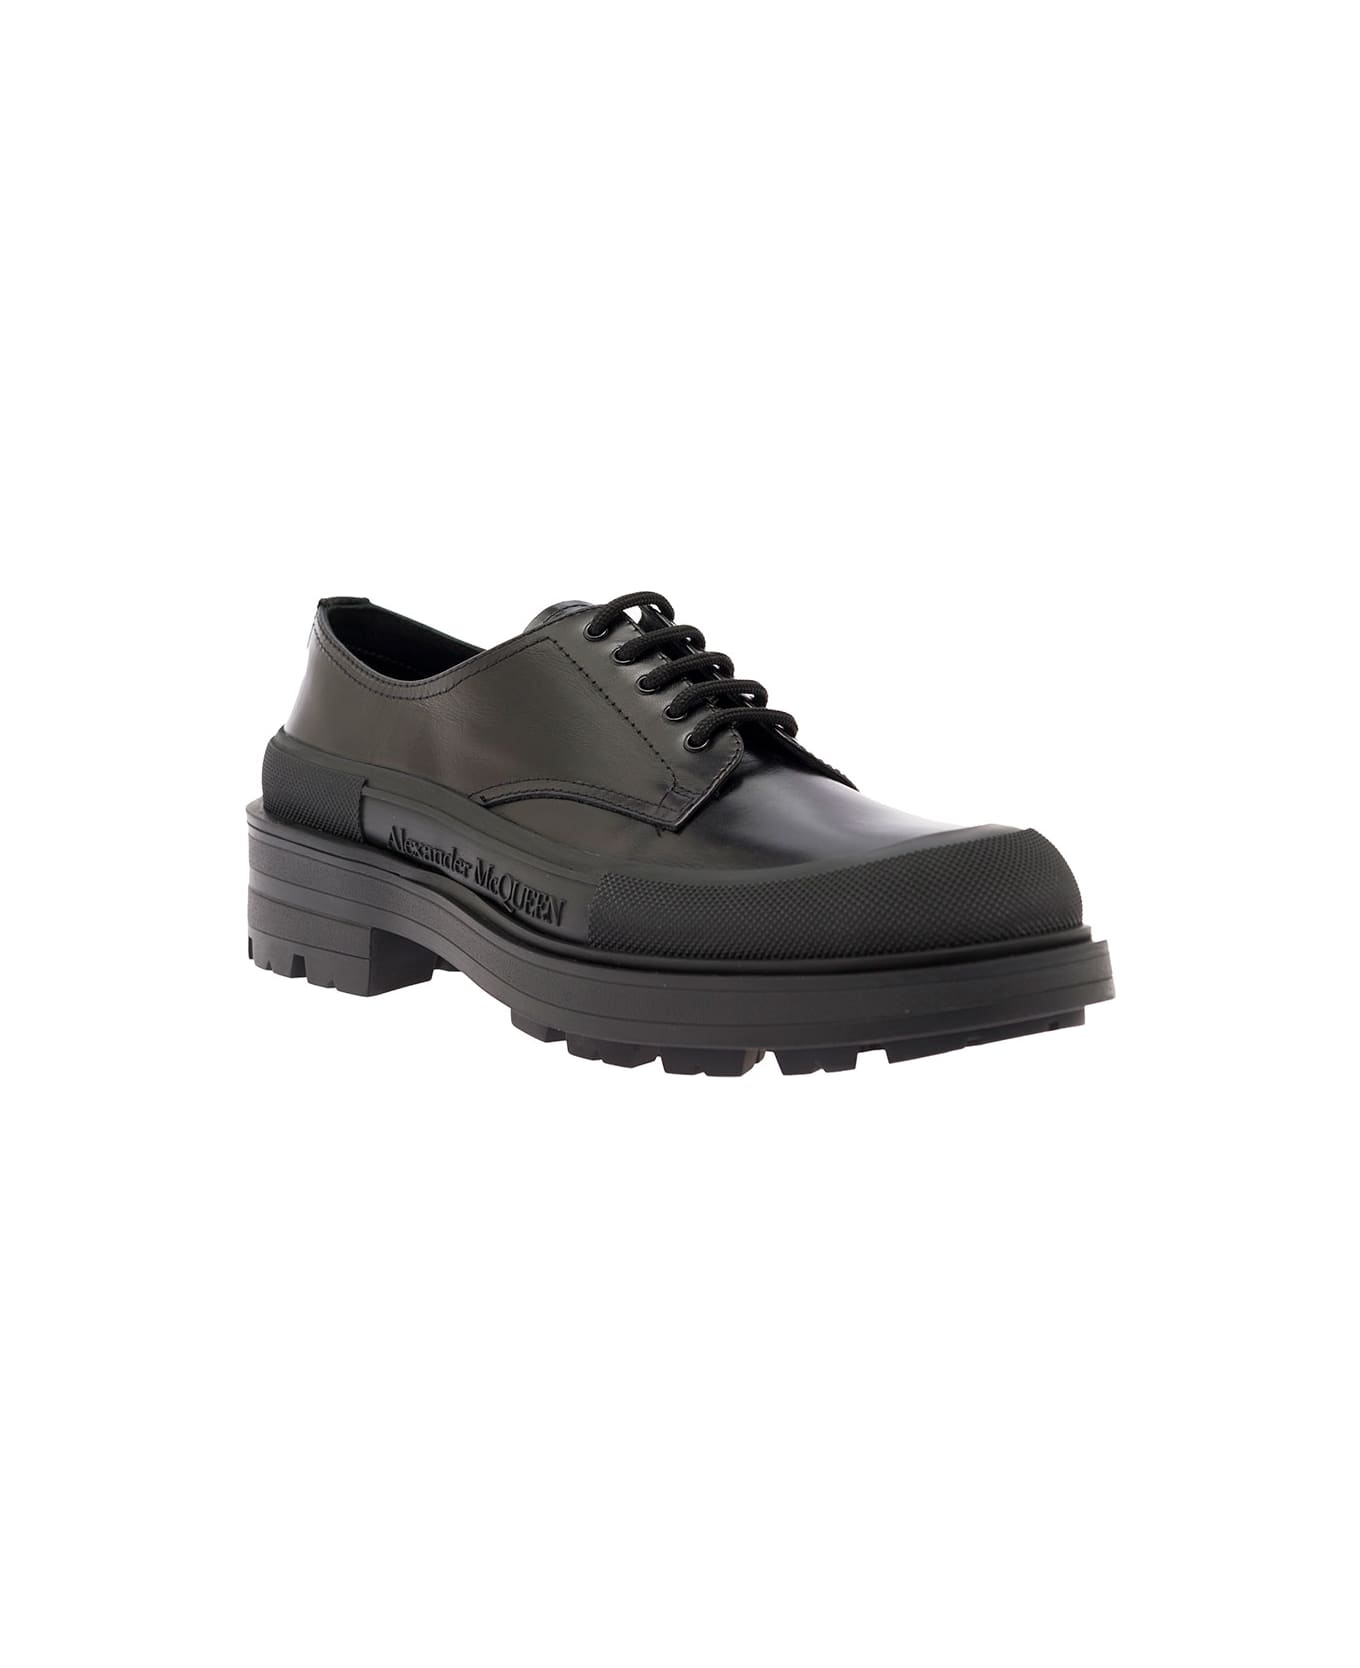 Alexander McQueen Black Derby Shoes In Calf Leather Man - Black ローファー＆デッキシューズ